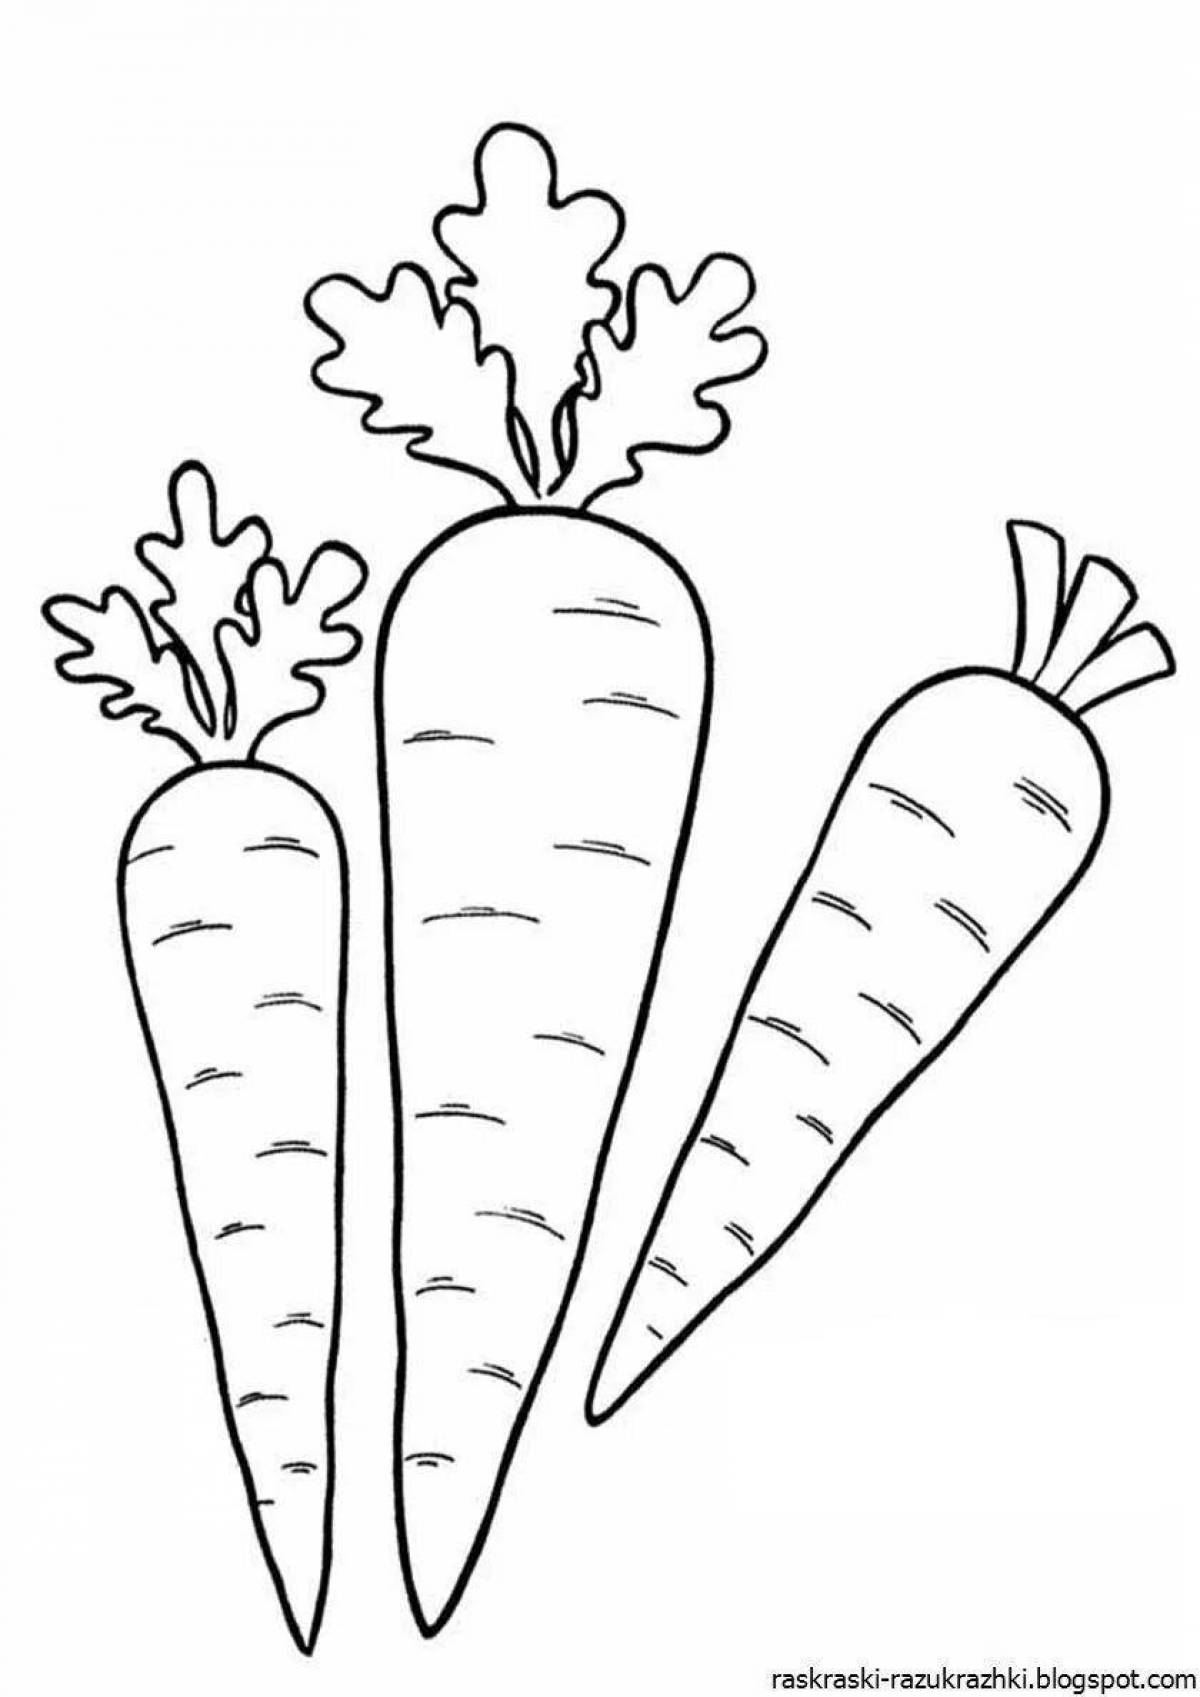 Carrot drawing for kids #5